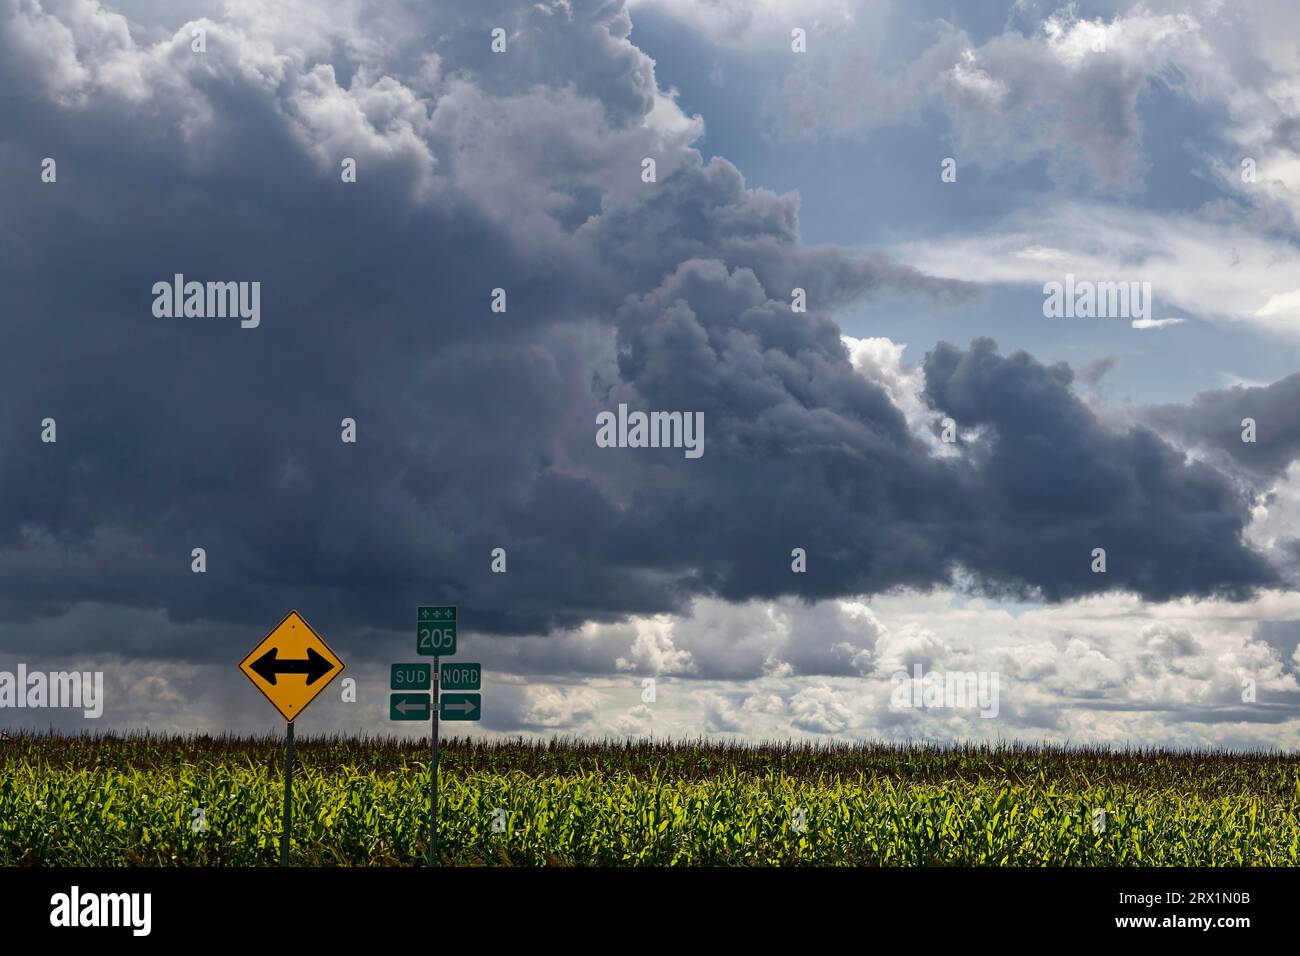 Agriculture, agricultural crop, storm clouds, farmland, Province of Quebec, Canada Stock Photo